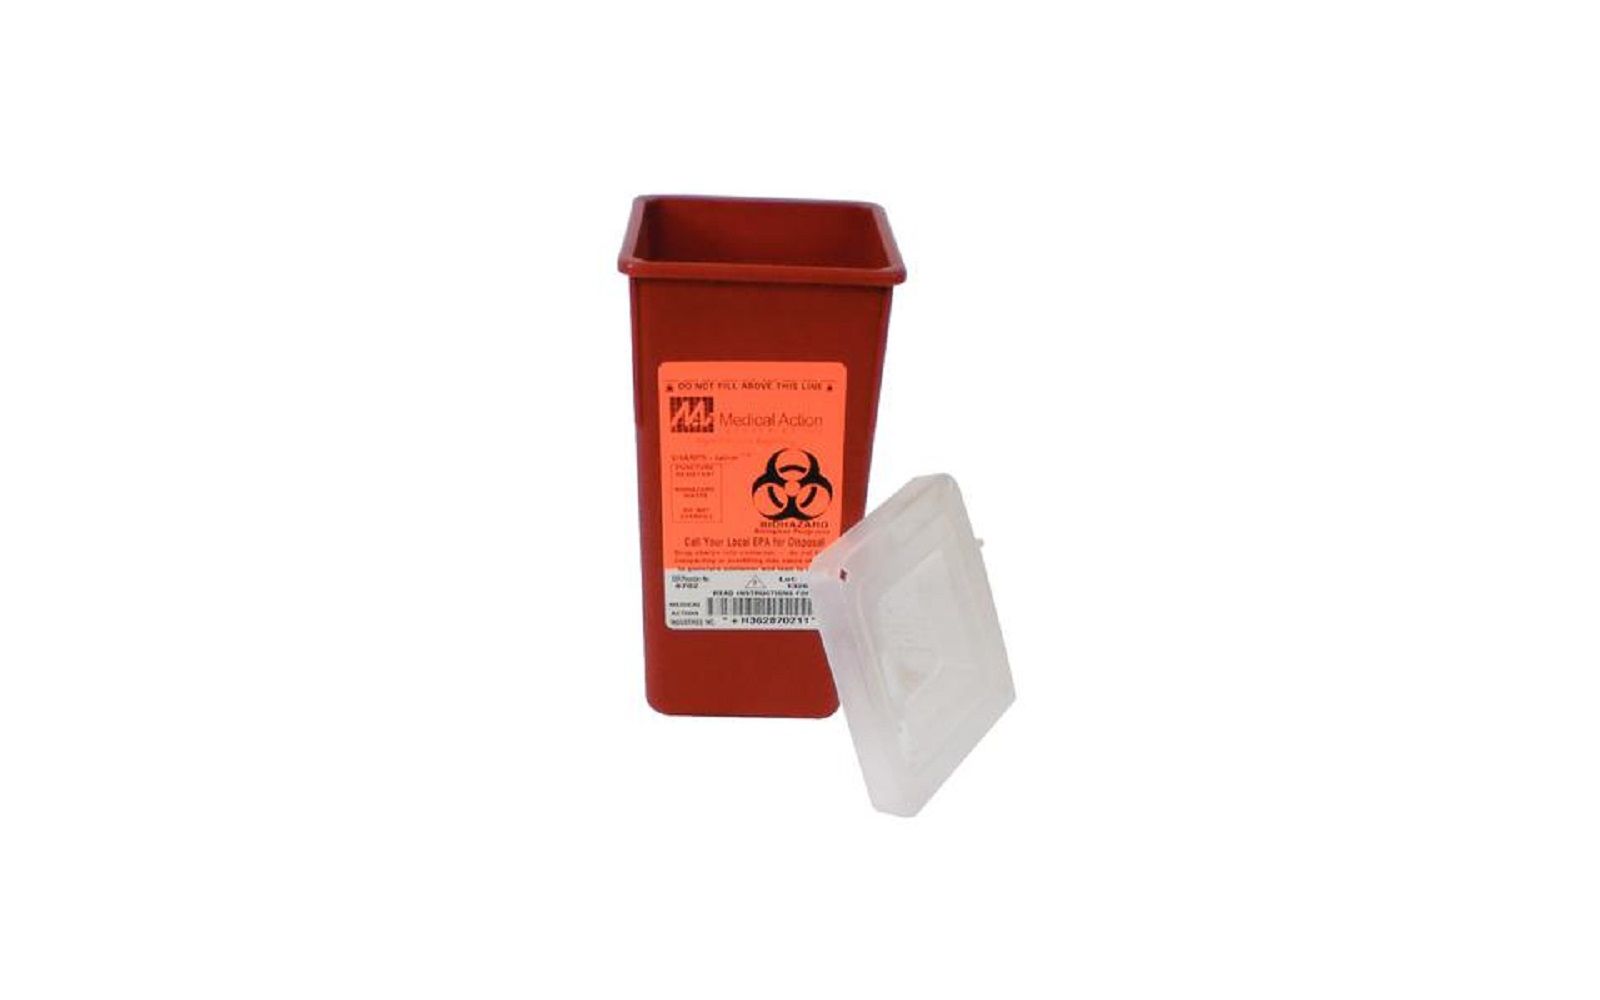 Stackable sharps container with biohazard symbol – polypropylene, red/black 1 quart